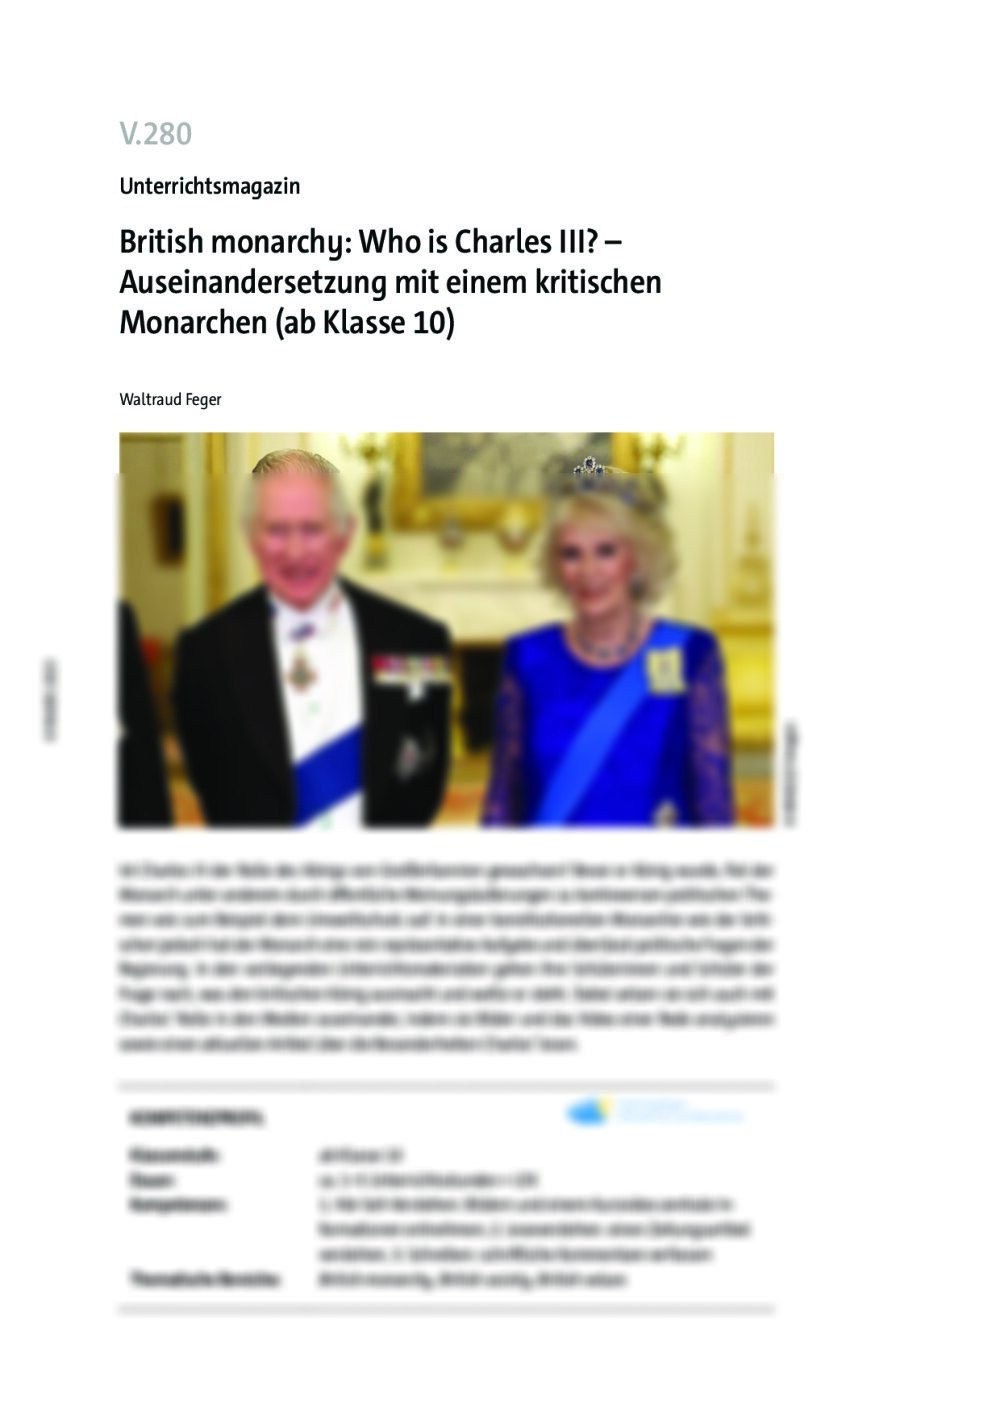 British monarchy: Who is Charles III? - Seite 1